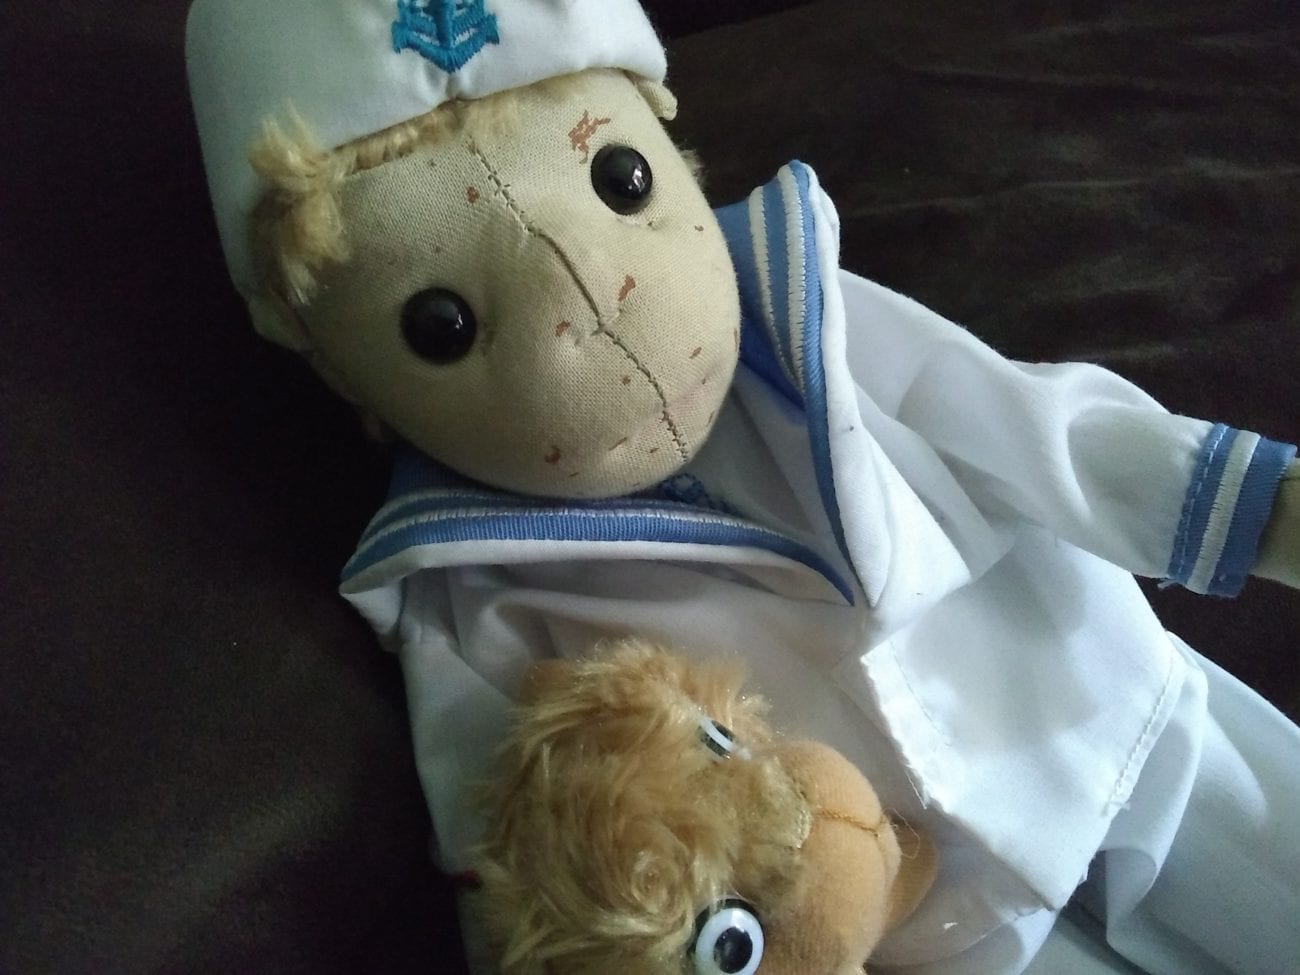 robert the doll picture without permission